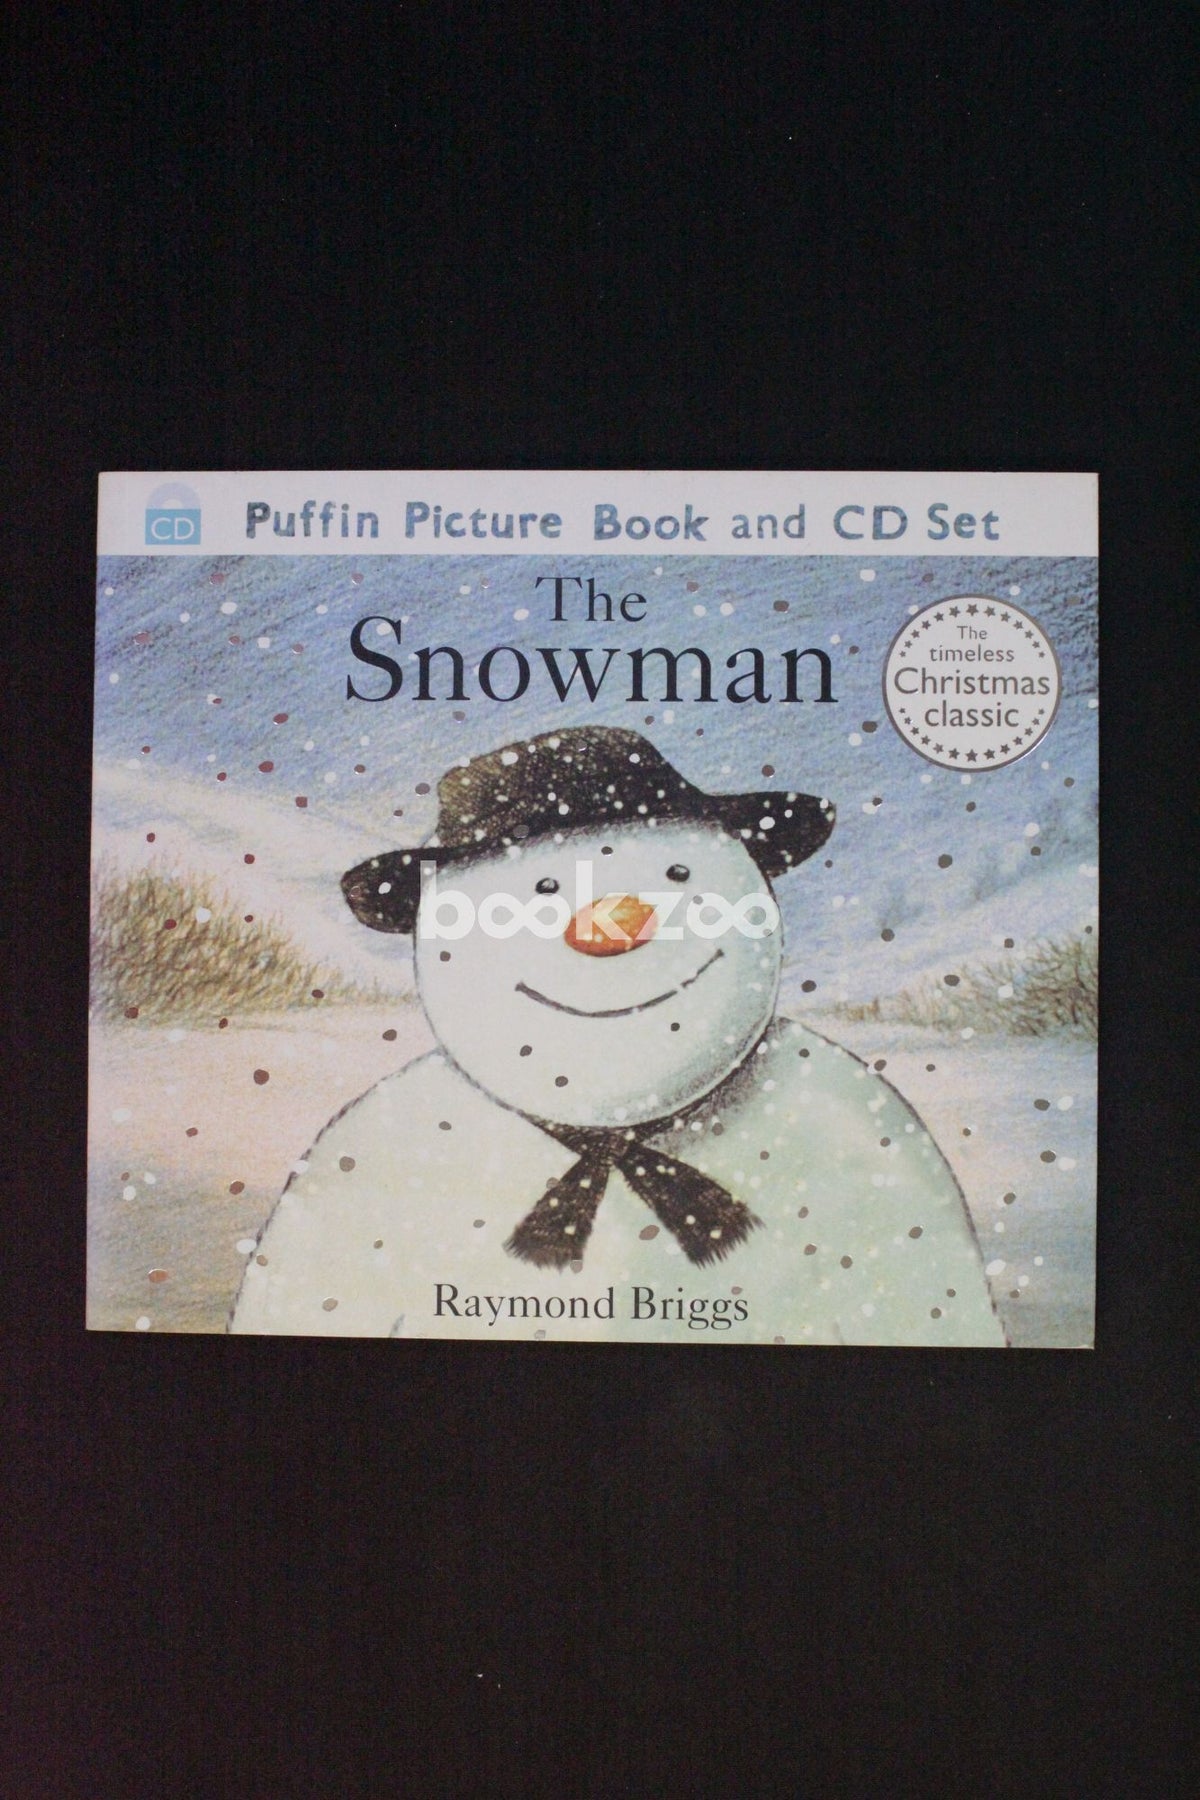 Buy The Snowman by Raymond Briggs at Online bookstore bookzoo.in